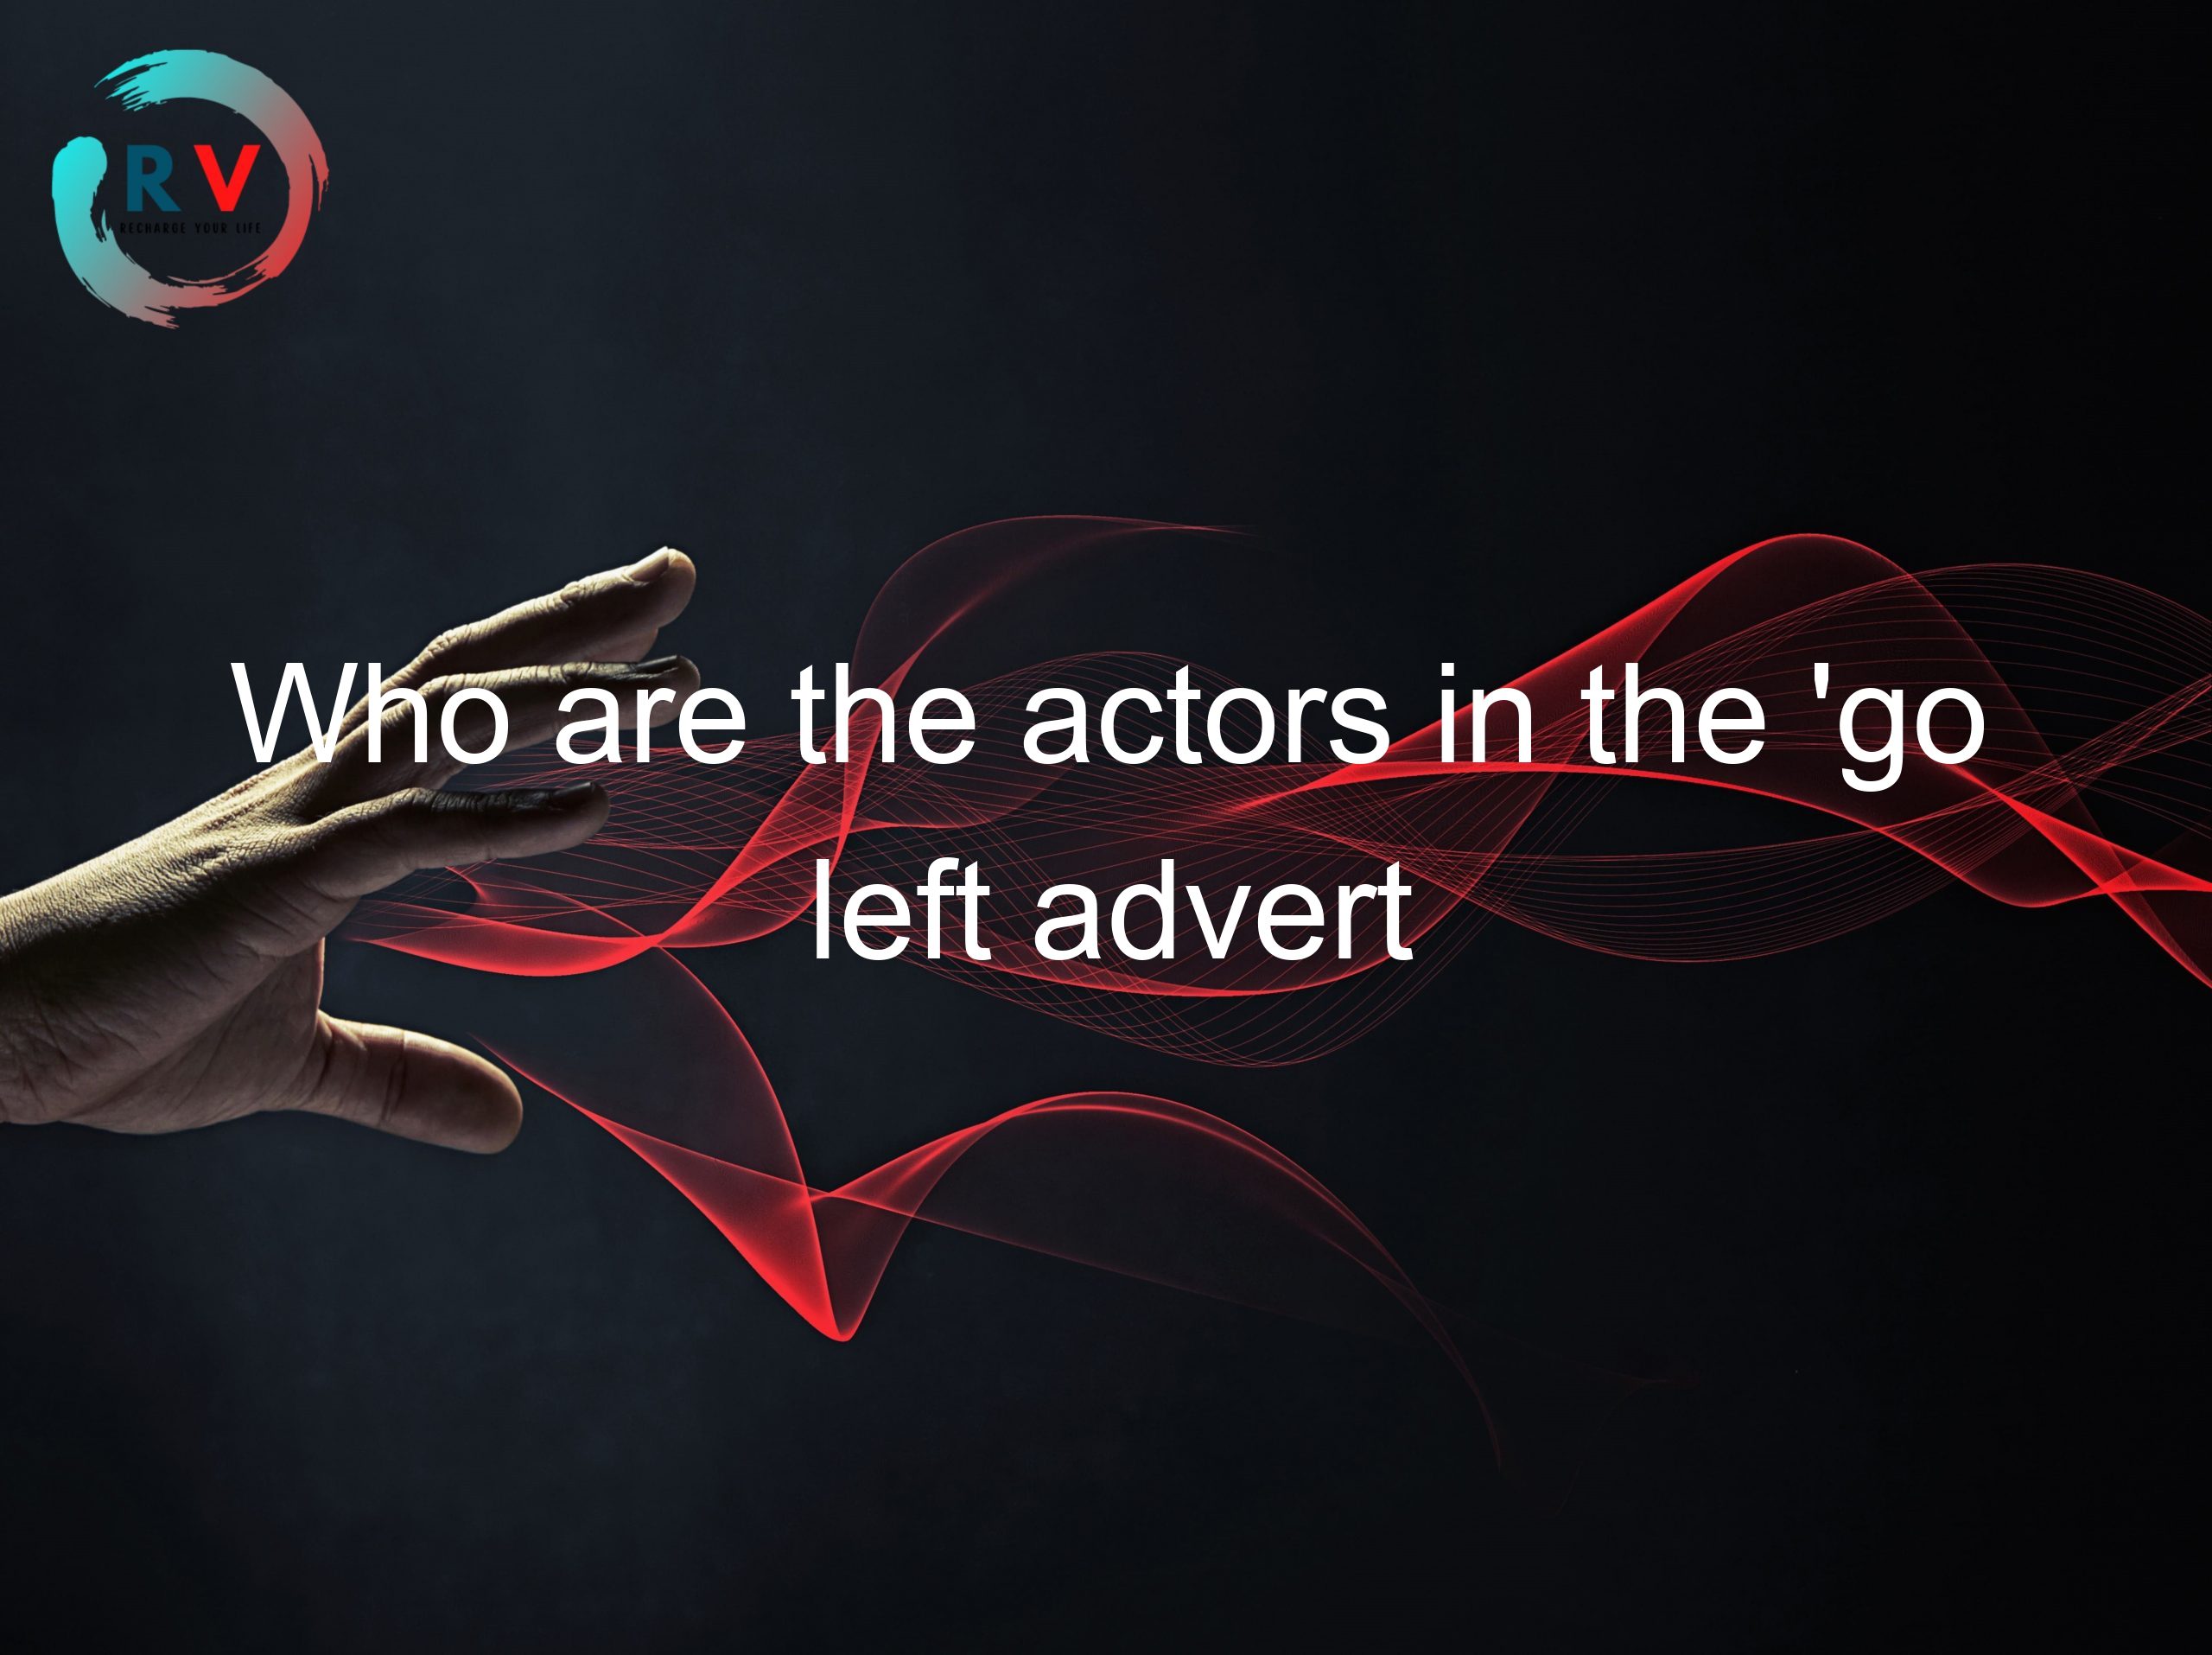 Who are the actors in the 'go left advert